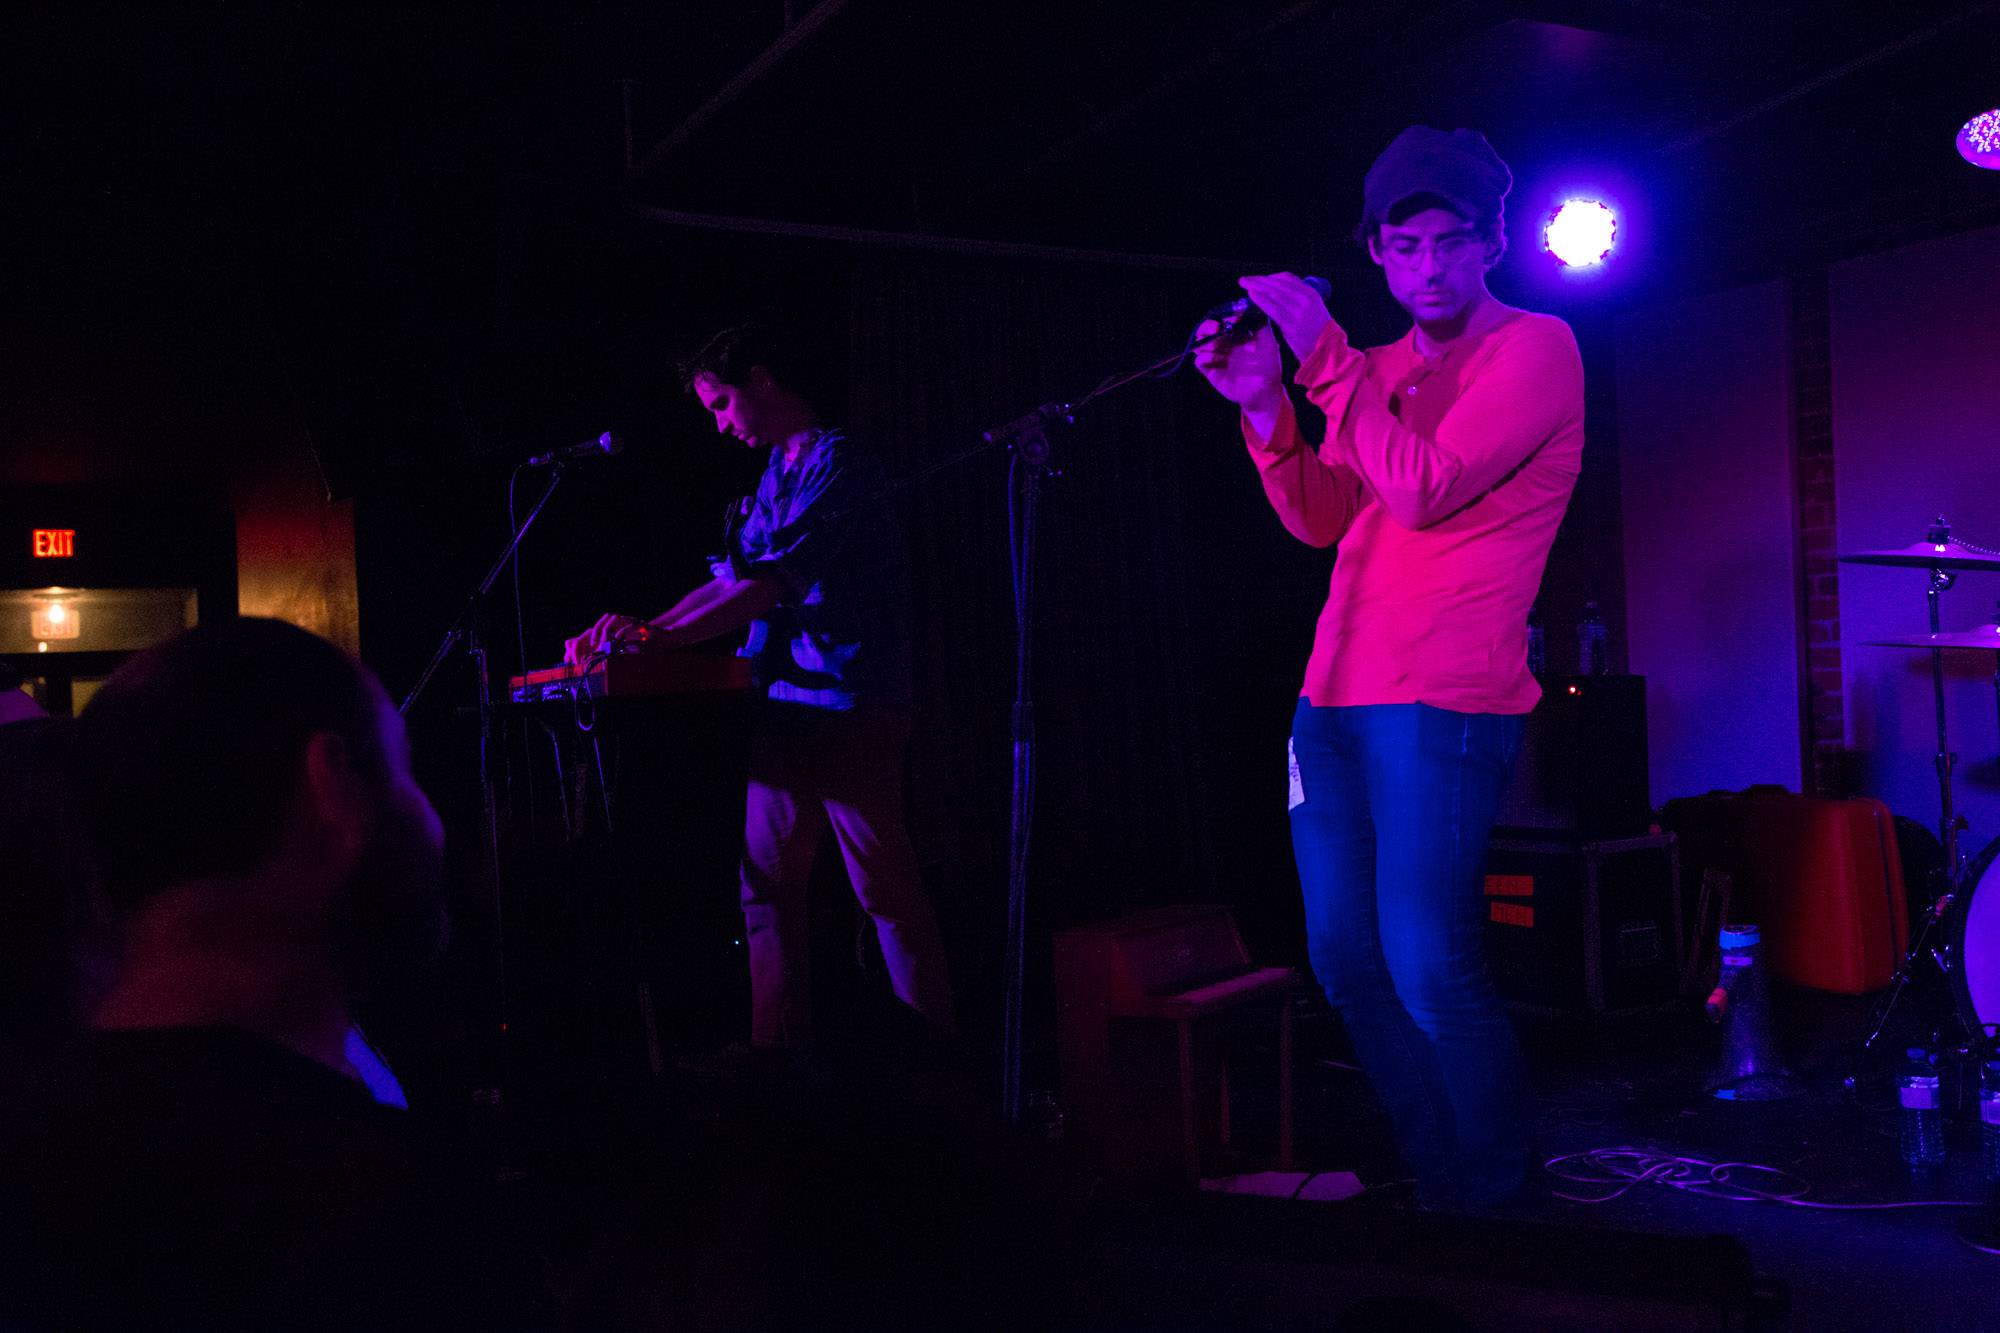 Clap Your Hands Say Yeah at the Electric Owl, Vancouver, July 18 2015. Kirk Chantraine photo.